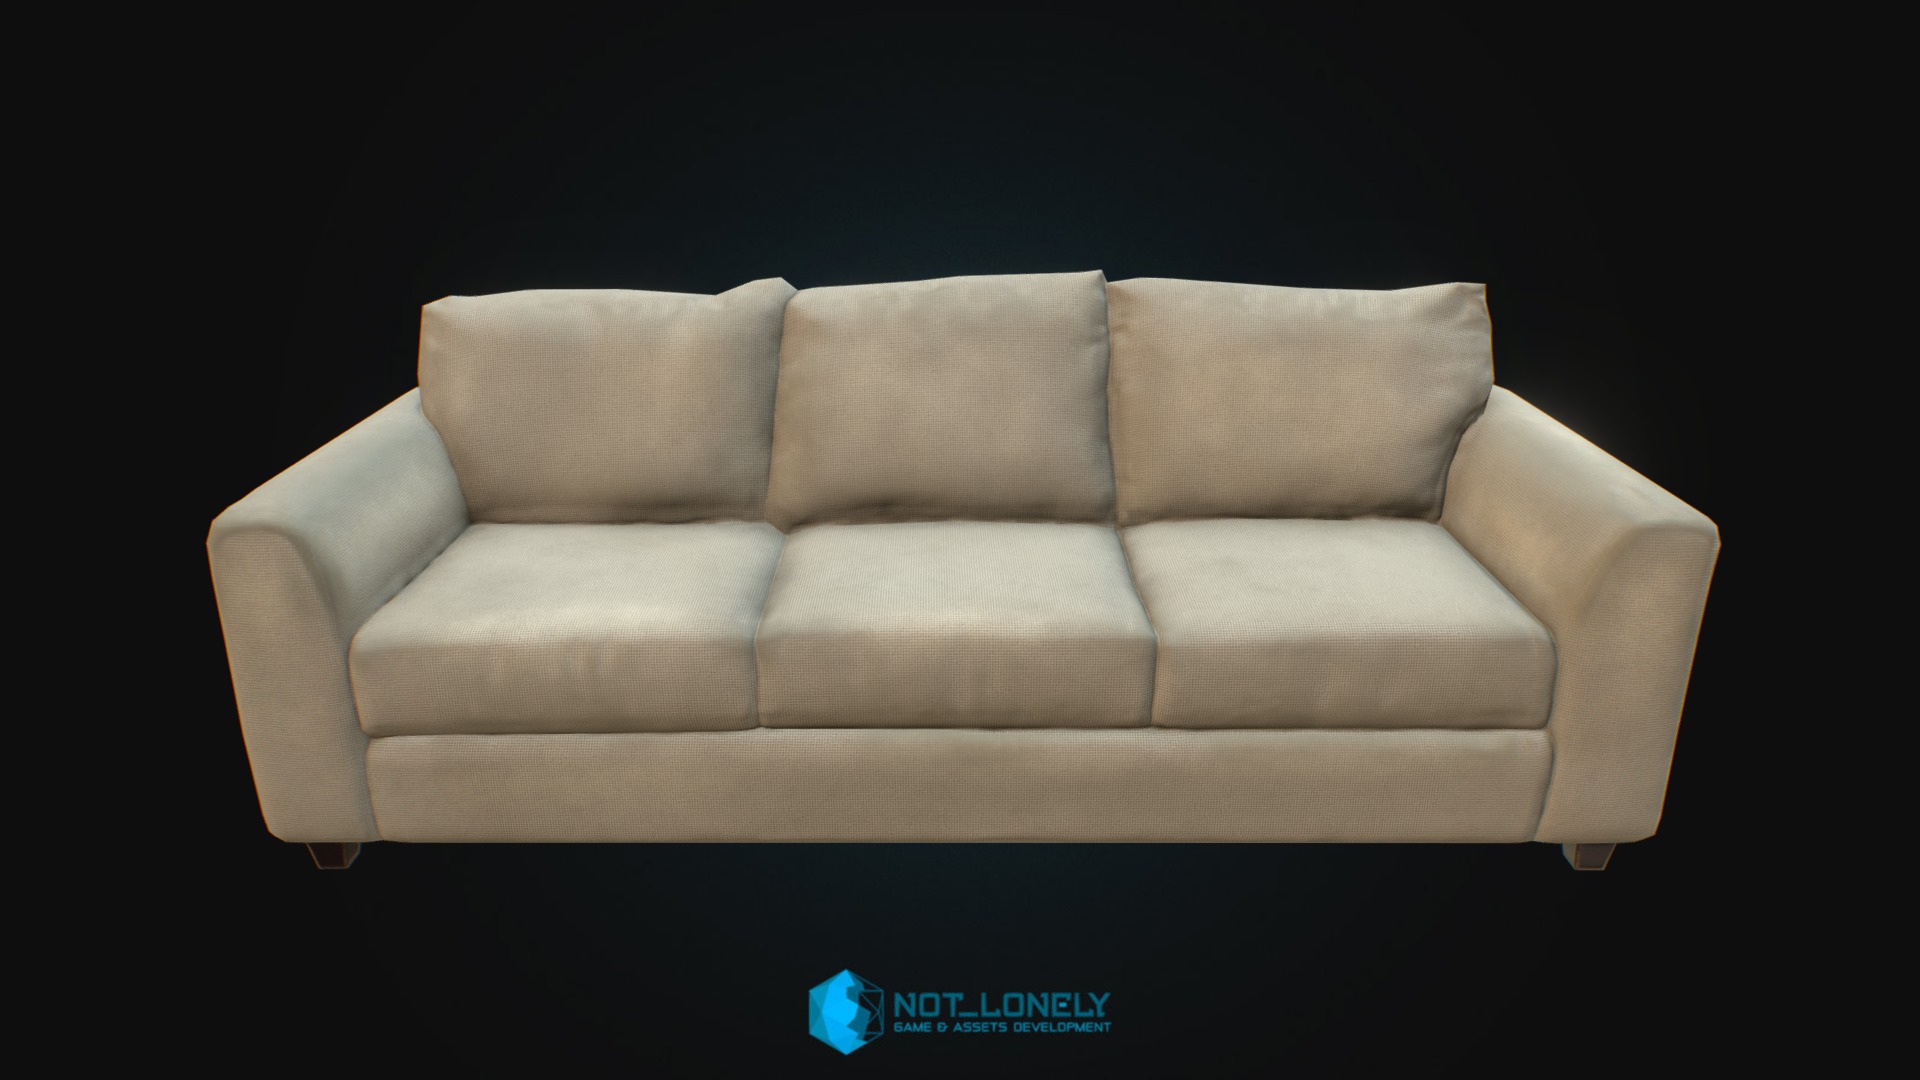 3D model Dirty Sofa - This is a 3D model of the Dirty Sofa. The 3D model is about a couch with a black background.